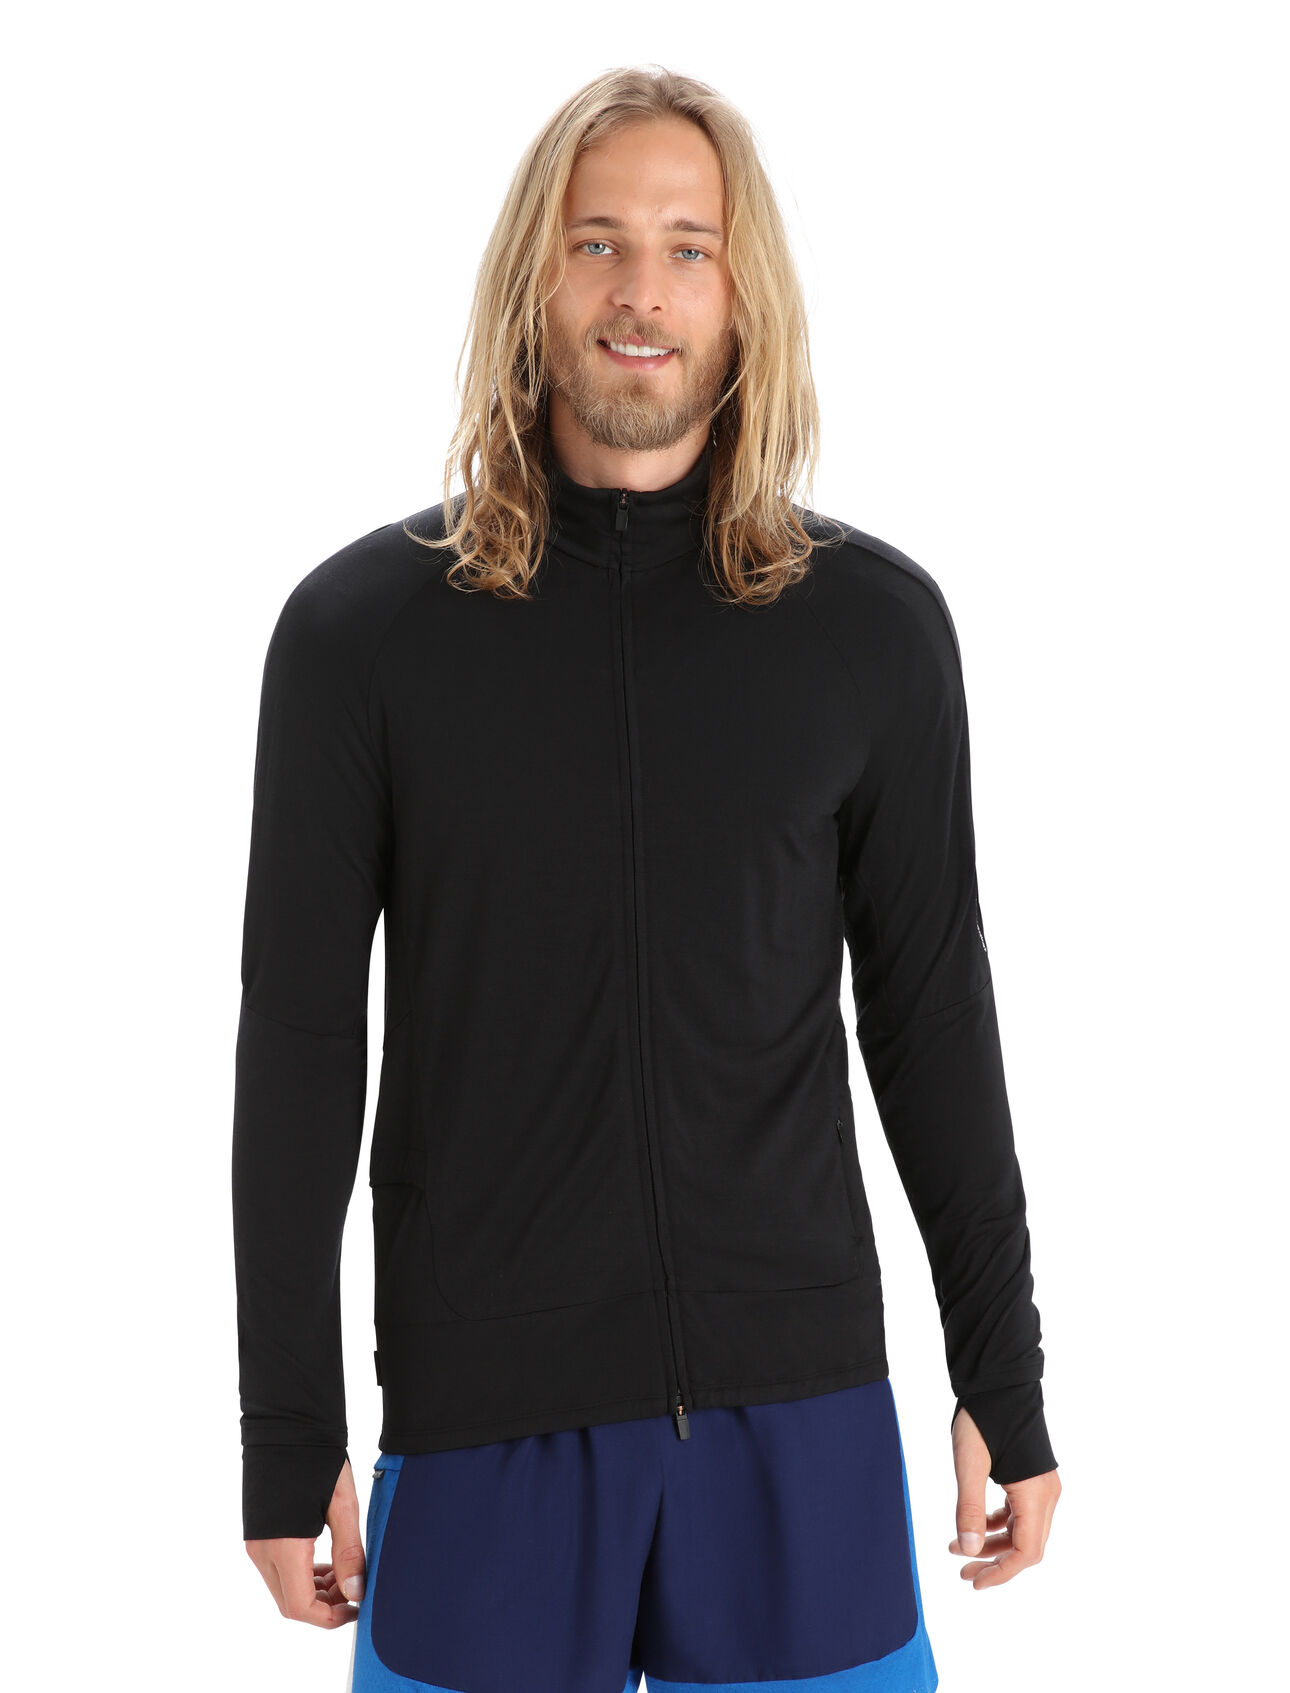 Mens ZoneKnit™ Merino Long Sleeve Zip A lightweight midlayer designed to balance warmth and breathability while running, biking or moving fast in the mountains, the ZoneKnit™ Long Sleeve Zip combines our Cool-Lite™ jersey fabric with strategic panels of eyelet mesh for enhanced airflow.